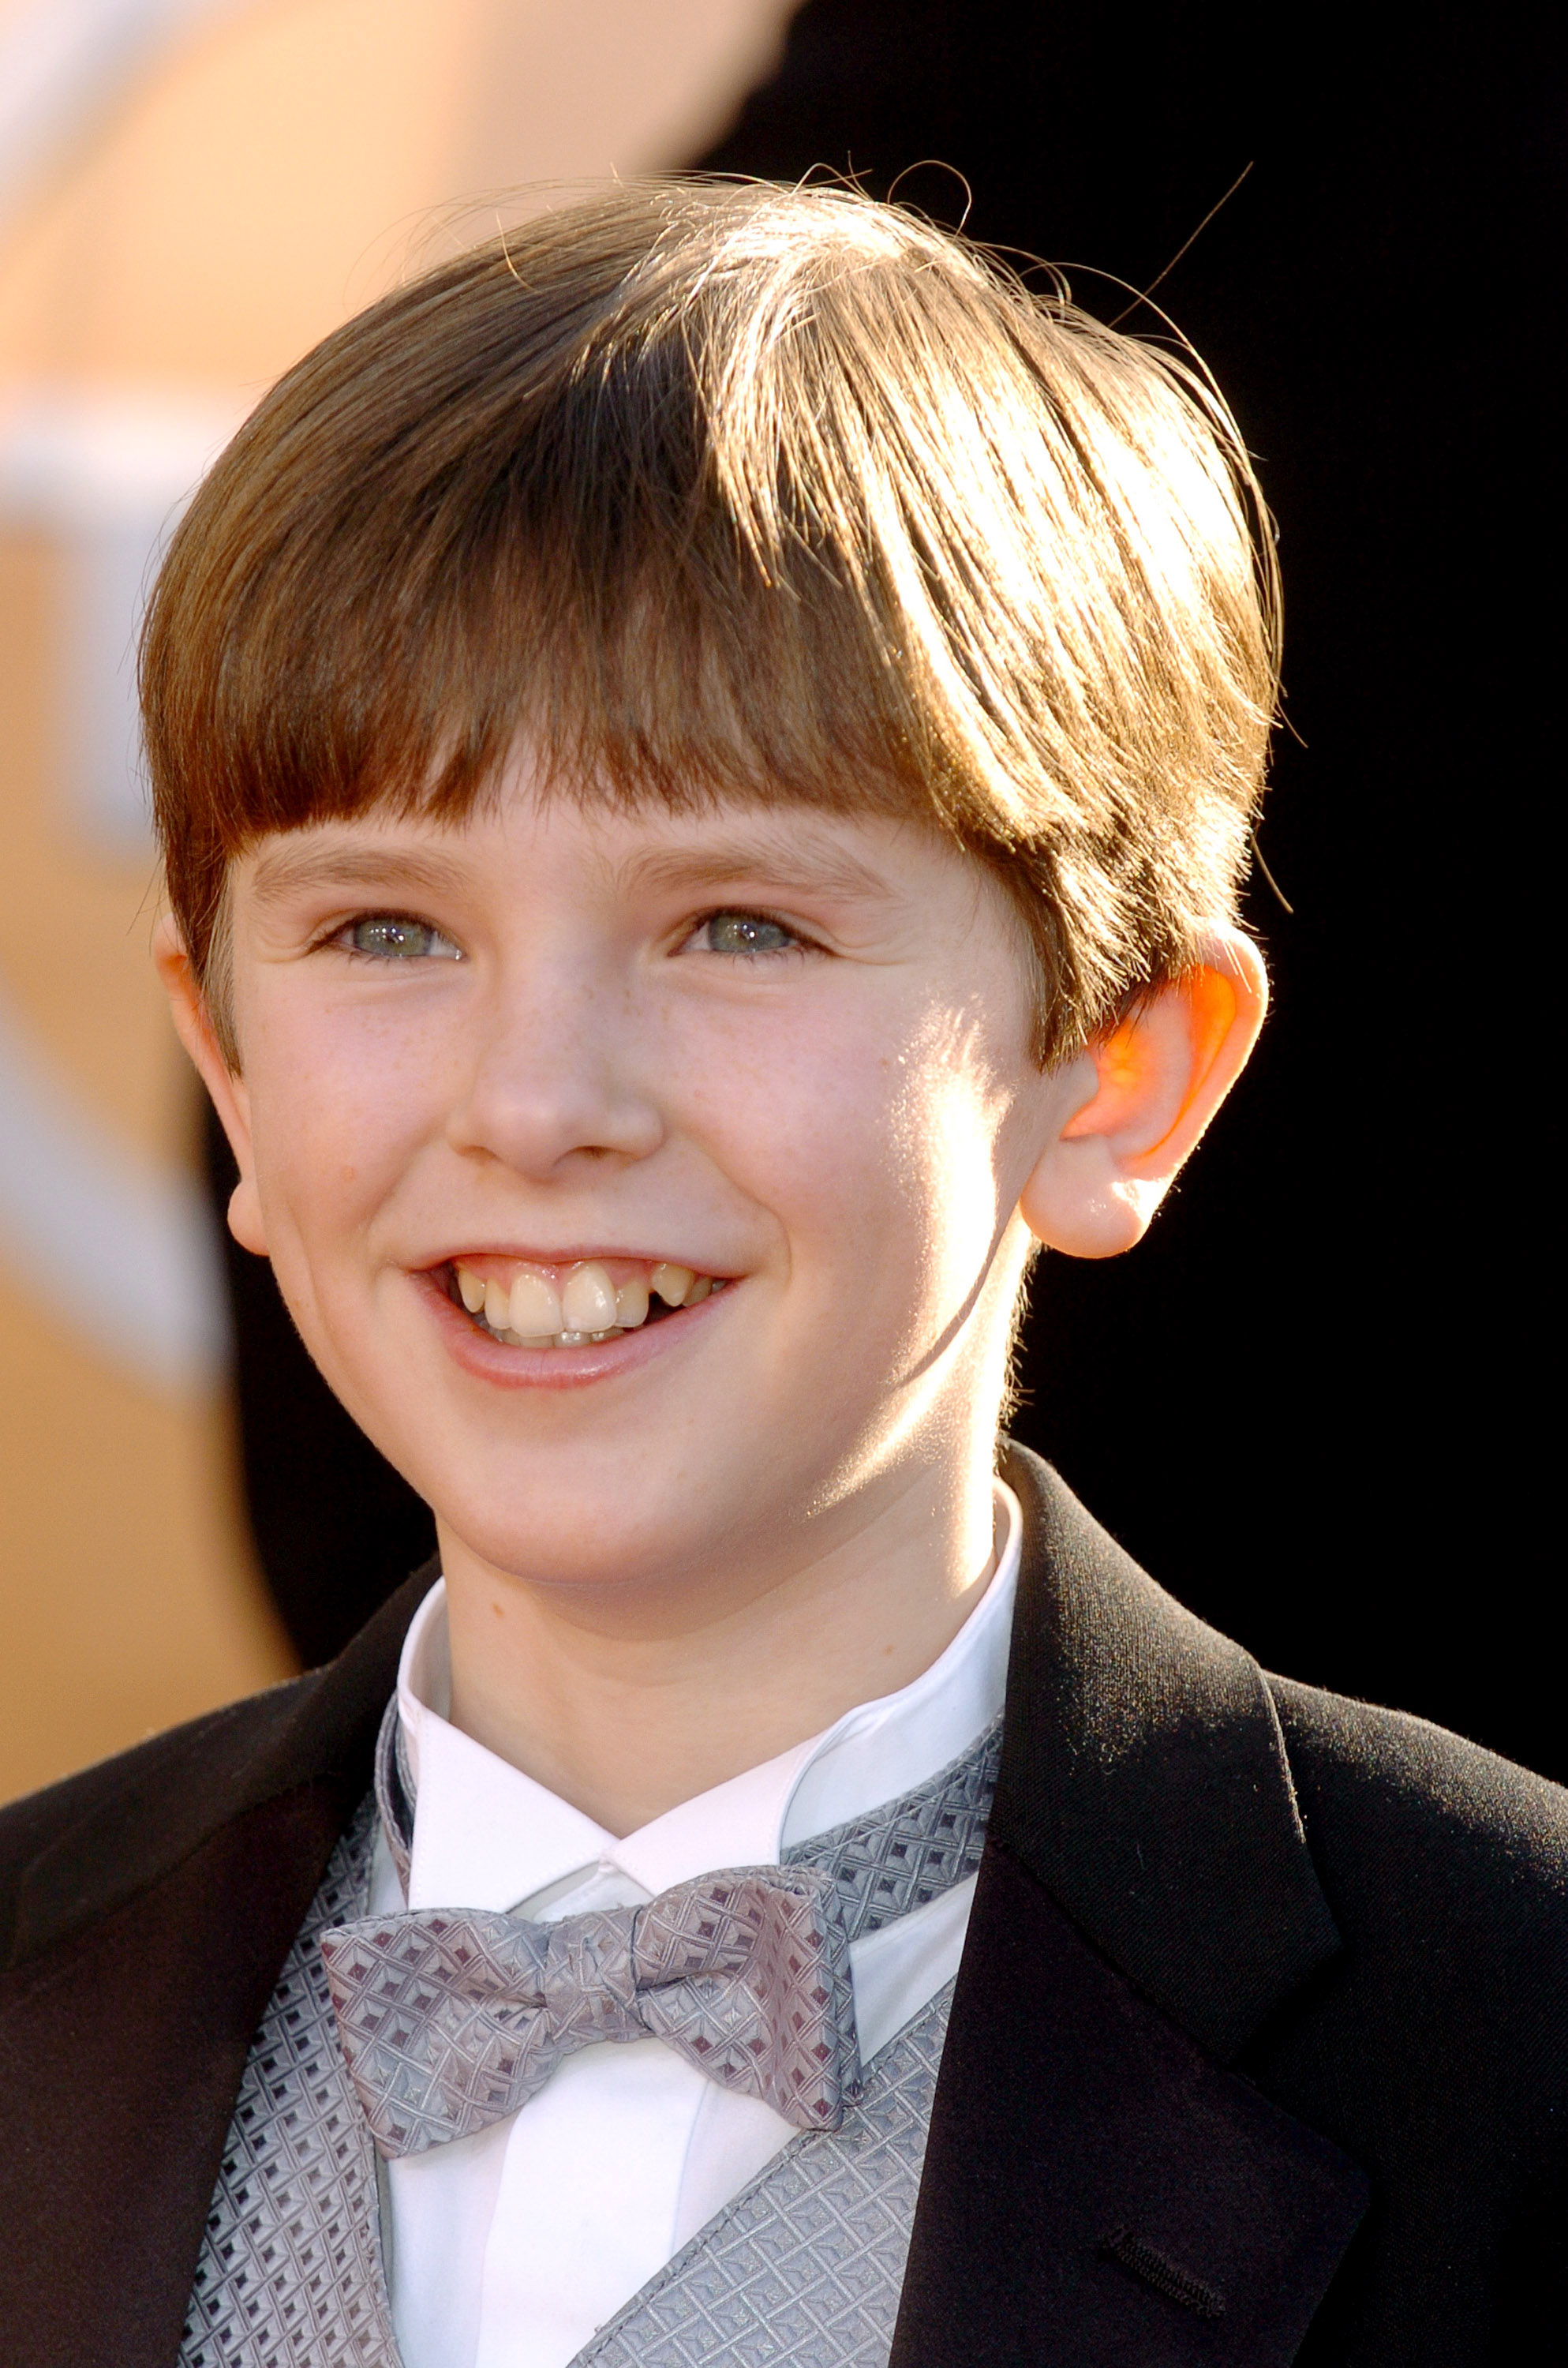 Freddie Highmore in Los Angeles, California, United States on February 5, 2005 | Source: Getty Images